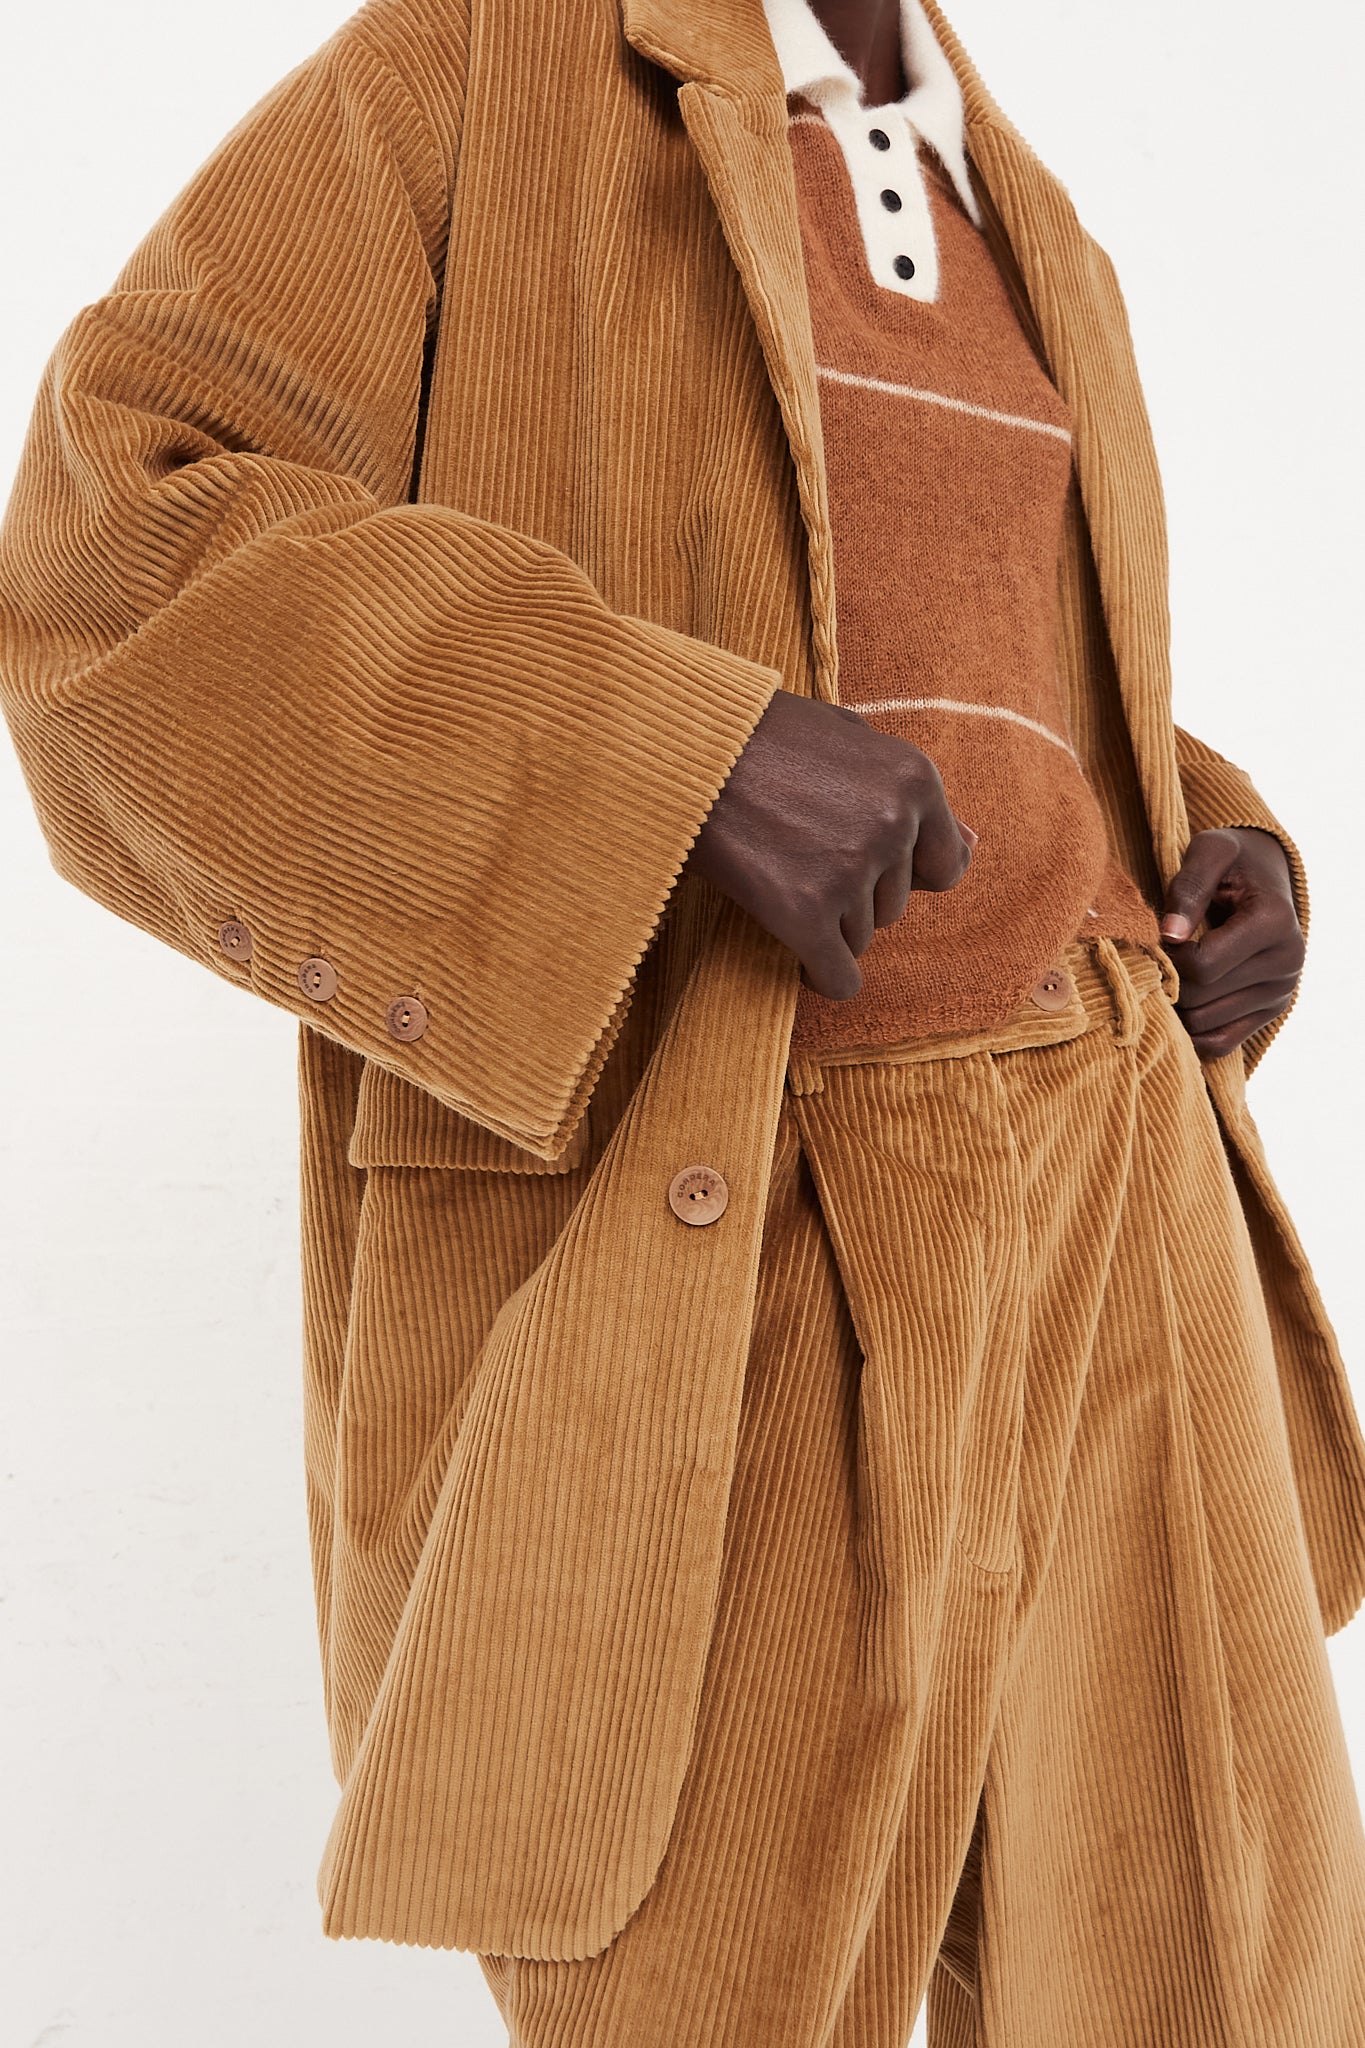 A model wearing a button blazer in a cotton corduroy featuring a notched collar, two flap pockets in front, and back vent. Blazer open highlighting knit and pants. Up close view of corduroy details. Oversized fit. Designed by Cordera - Oroboro Store